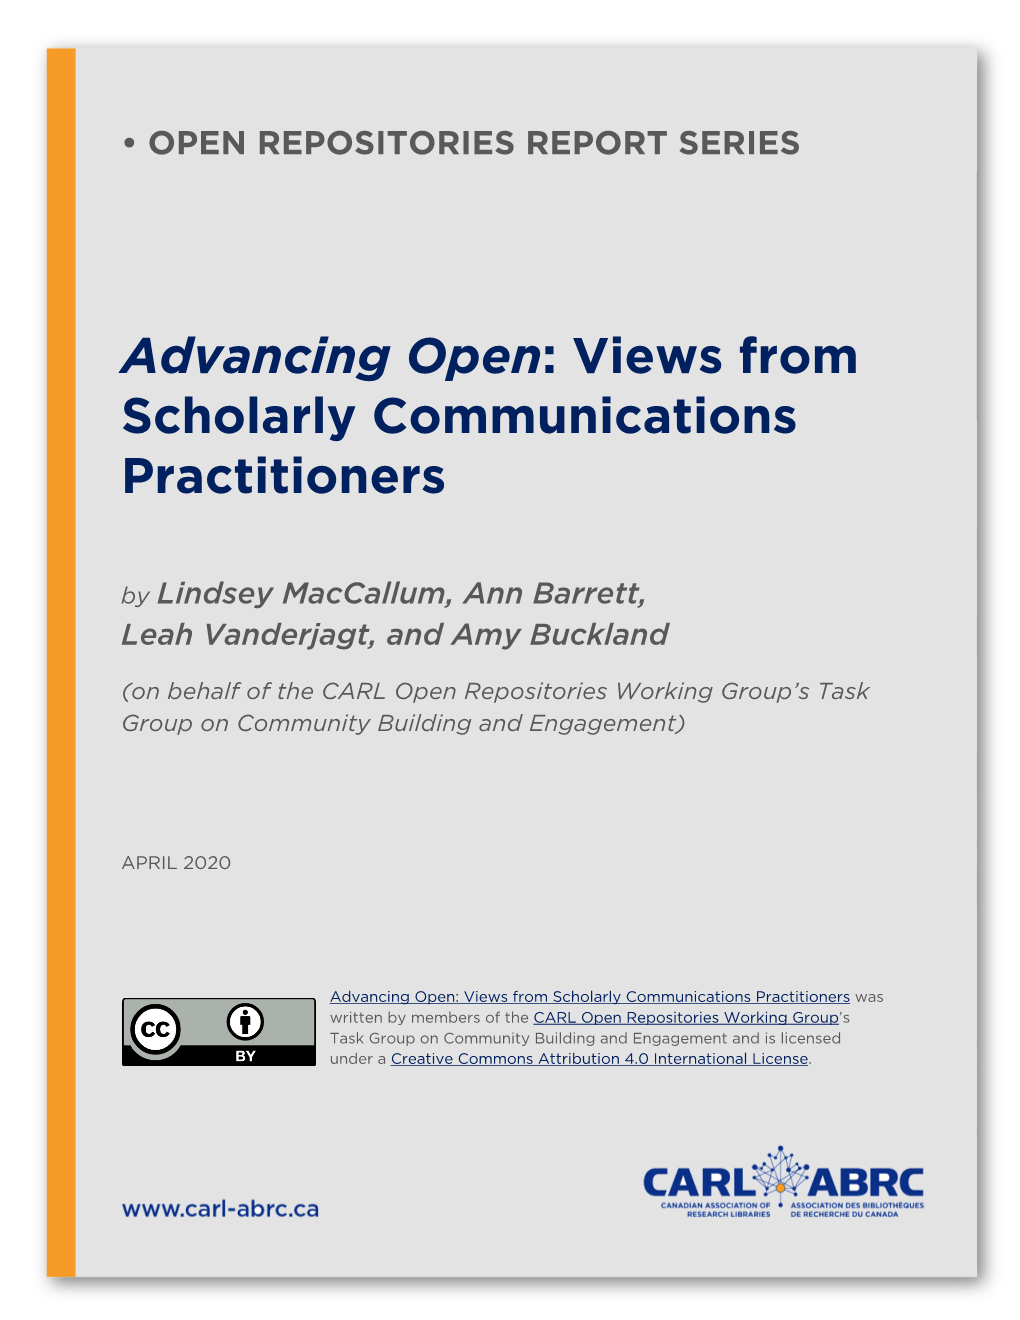 Advancing Open: Views from Scholarly Communications Practitioners